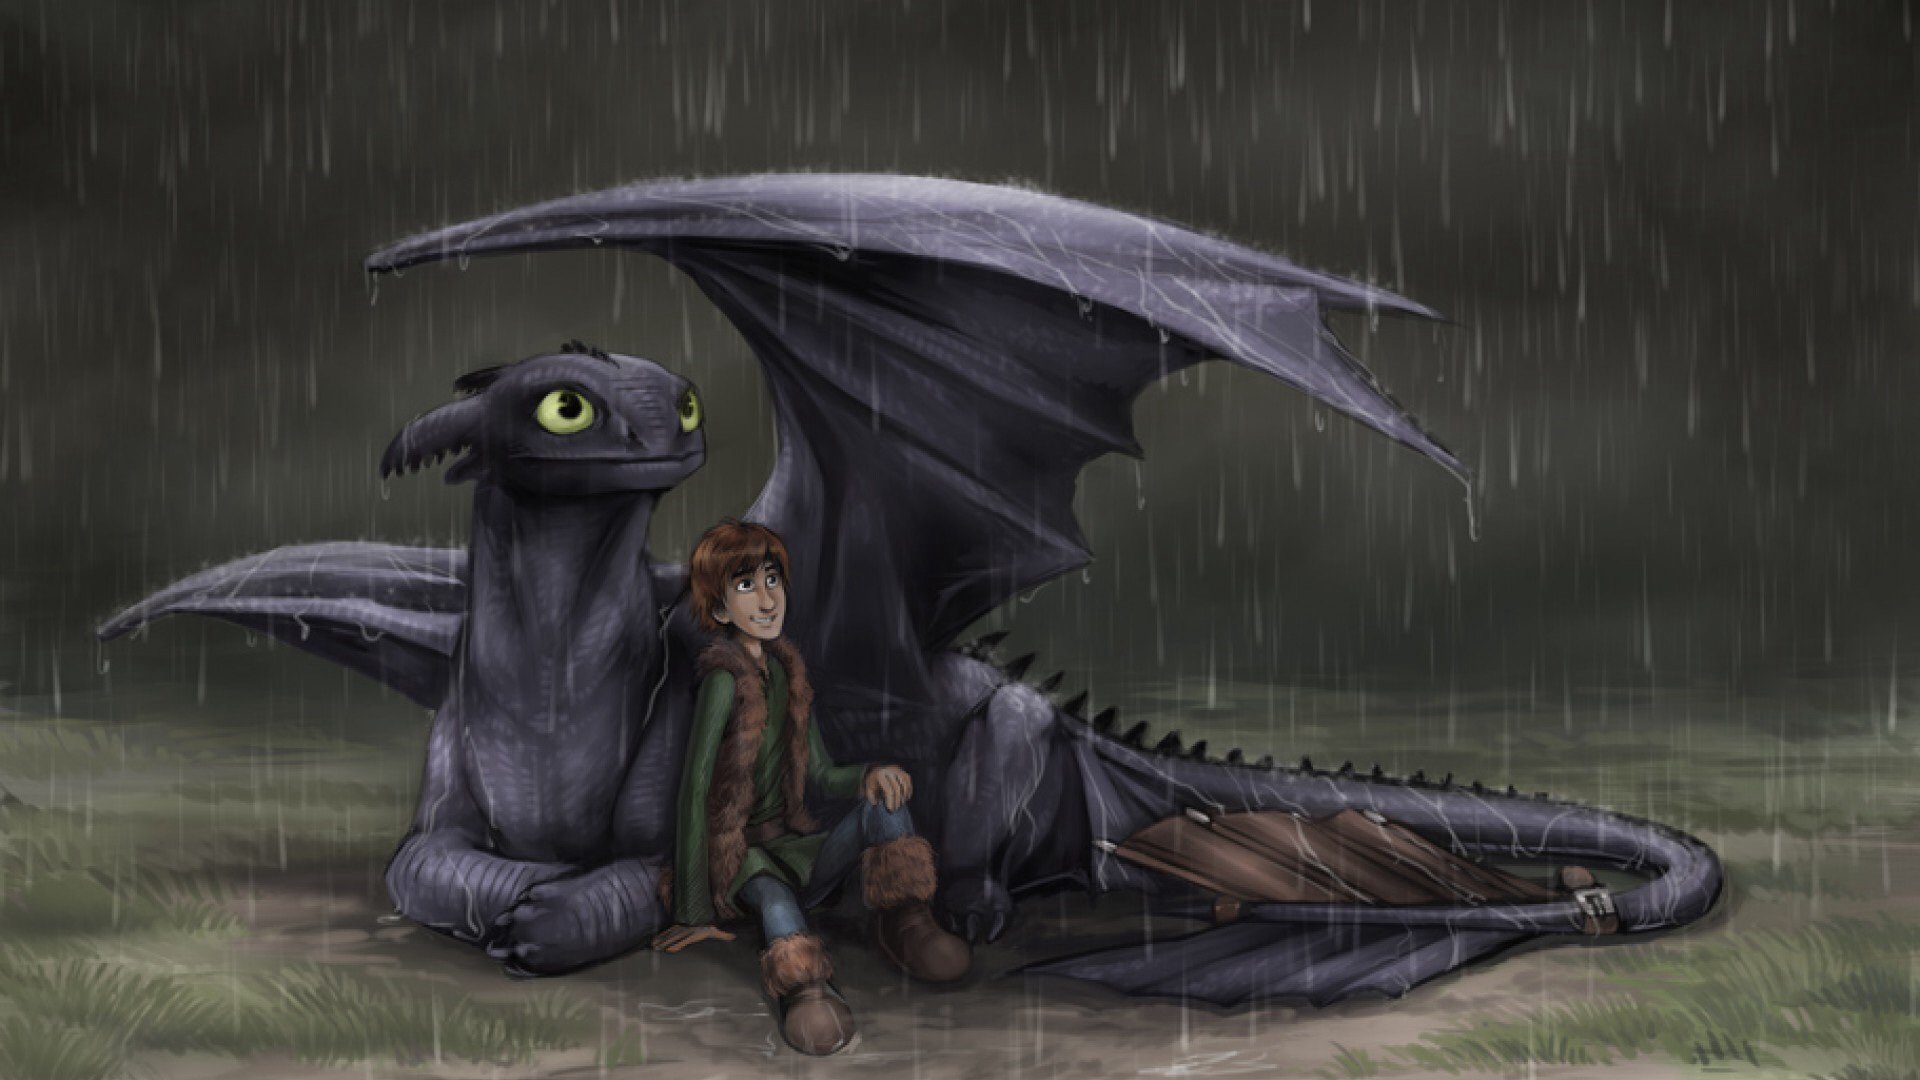 Wallpaper ID 141982  how to train your dragon 3 Hiccup Night Fury  Toothless free download